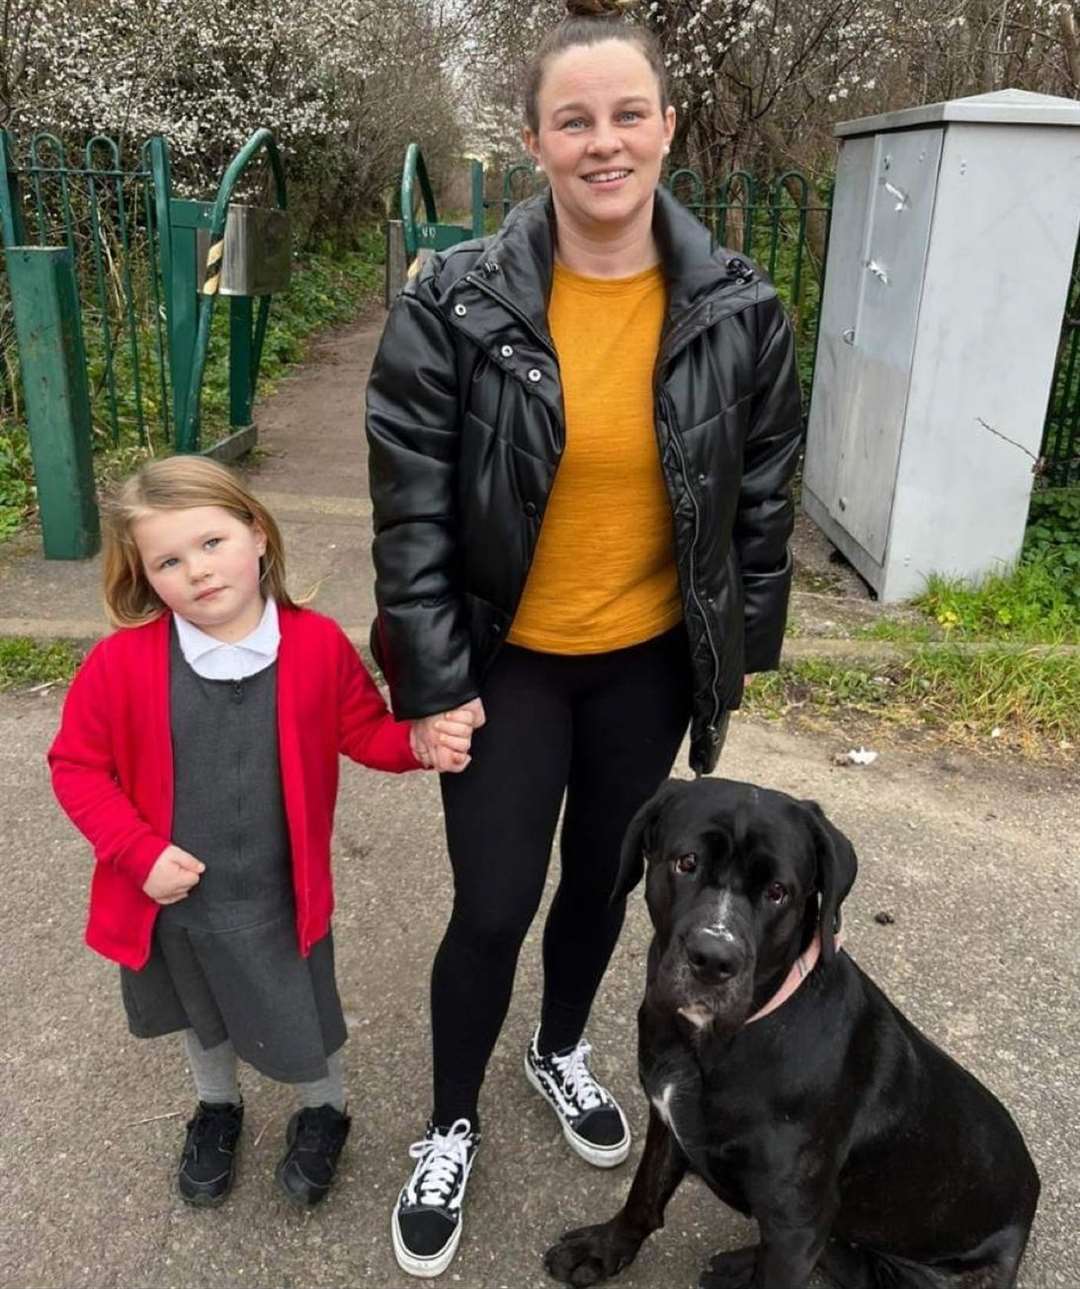 Rachel Davis with daughter Rosie and dog, Ruby, where the flasher was spotted in Marsh Street, Temple Hill, Dartford